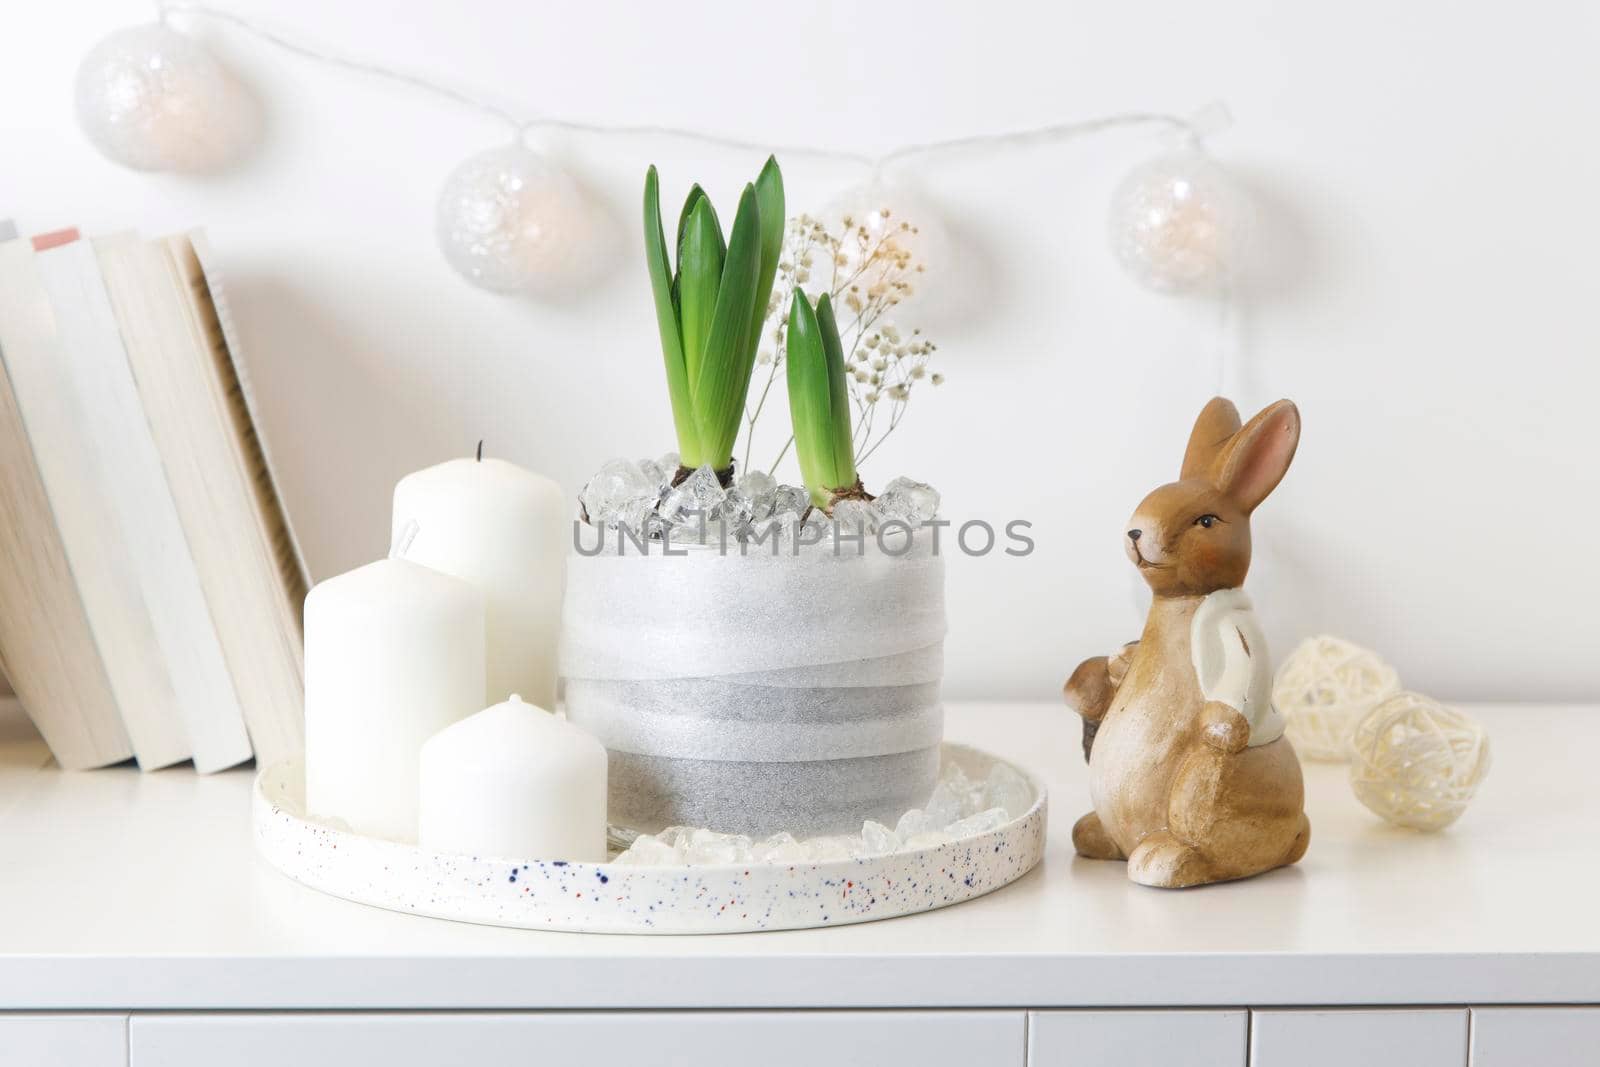 Unblown hyacinths with burning candles on a tray, a stack of books, a mug of tea, a garland of thread on the wall. Easter room decoration.